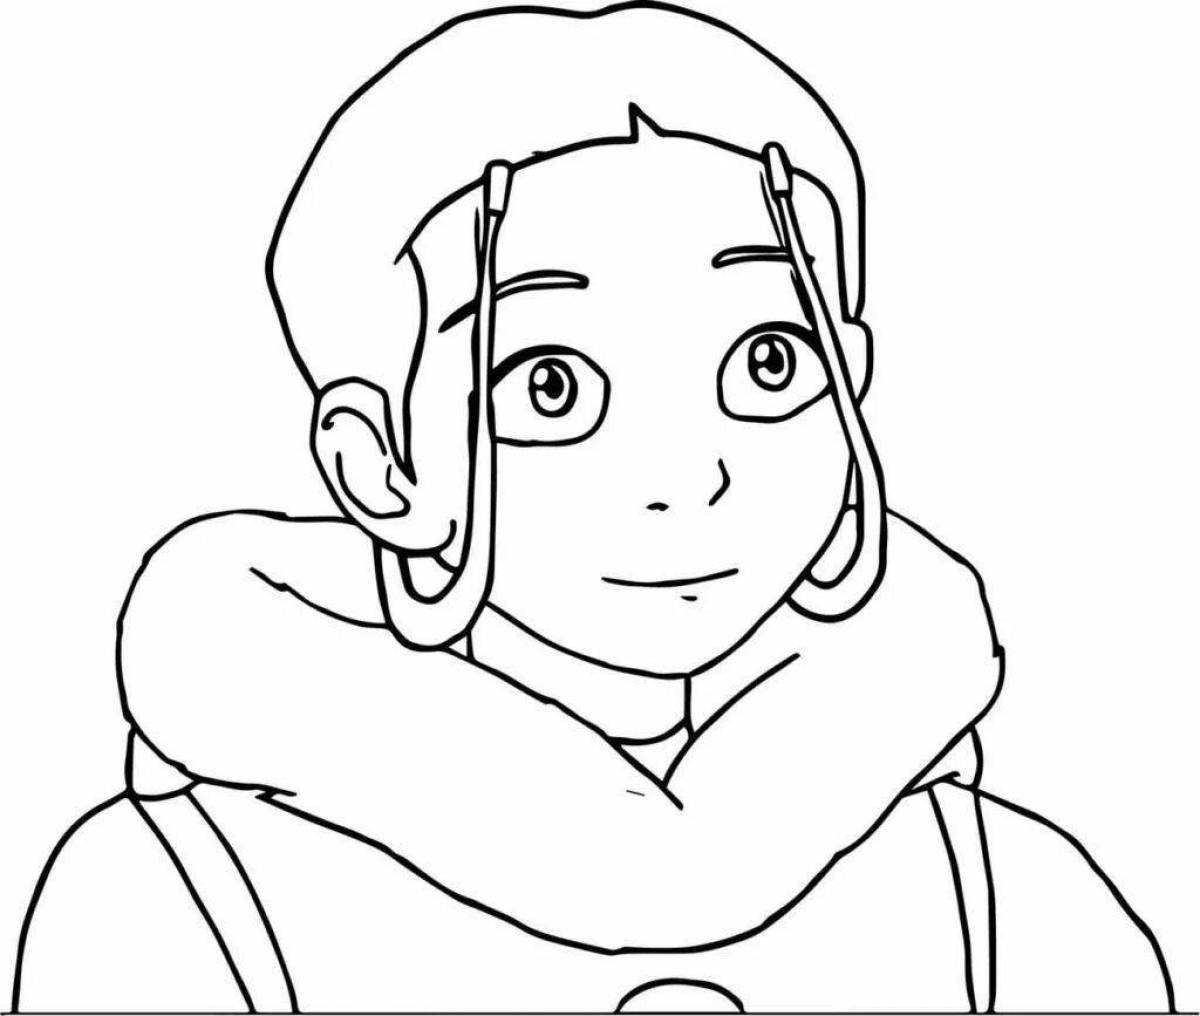 Glitter avatar coloring page